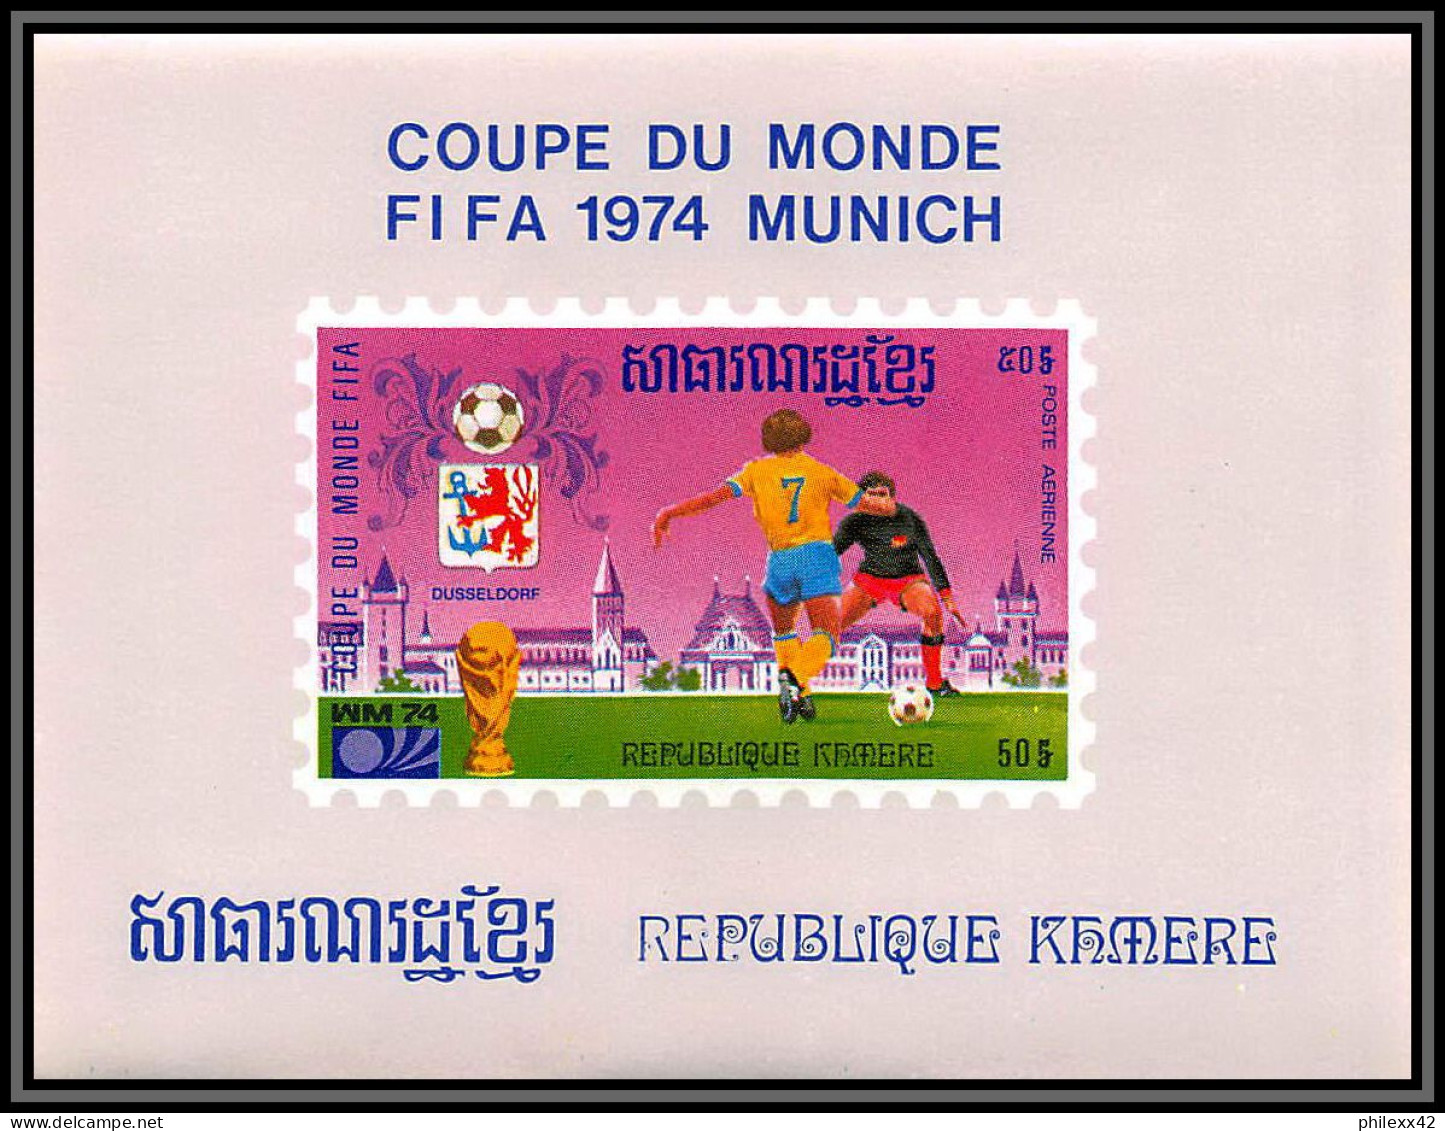 86223 Mi N°420/428 Football soccer munich wold cup 1974 deluxe miniature sheets ** MNH khmère Cambodia cambodge